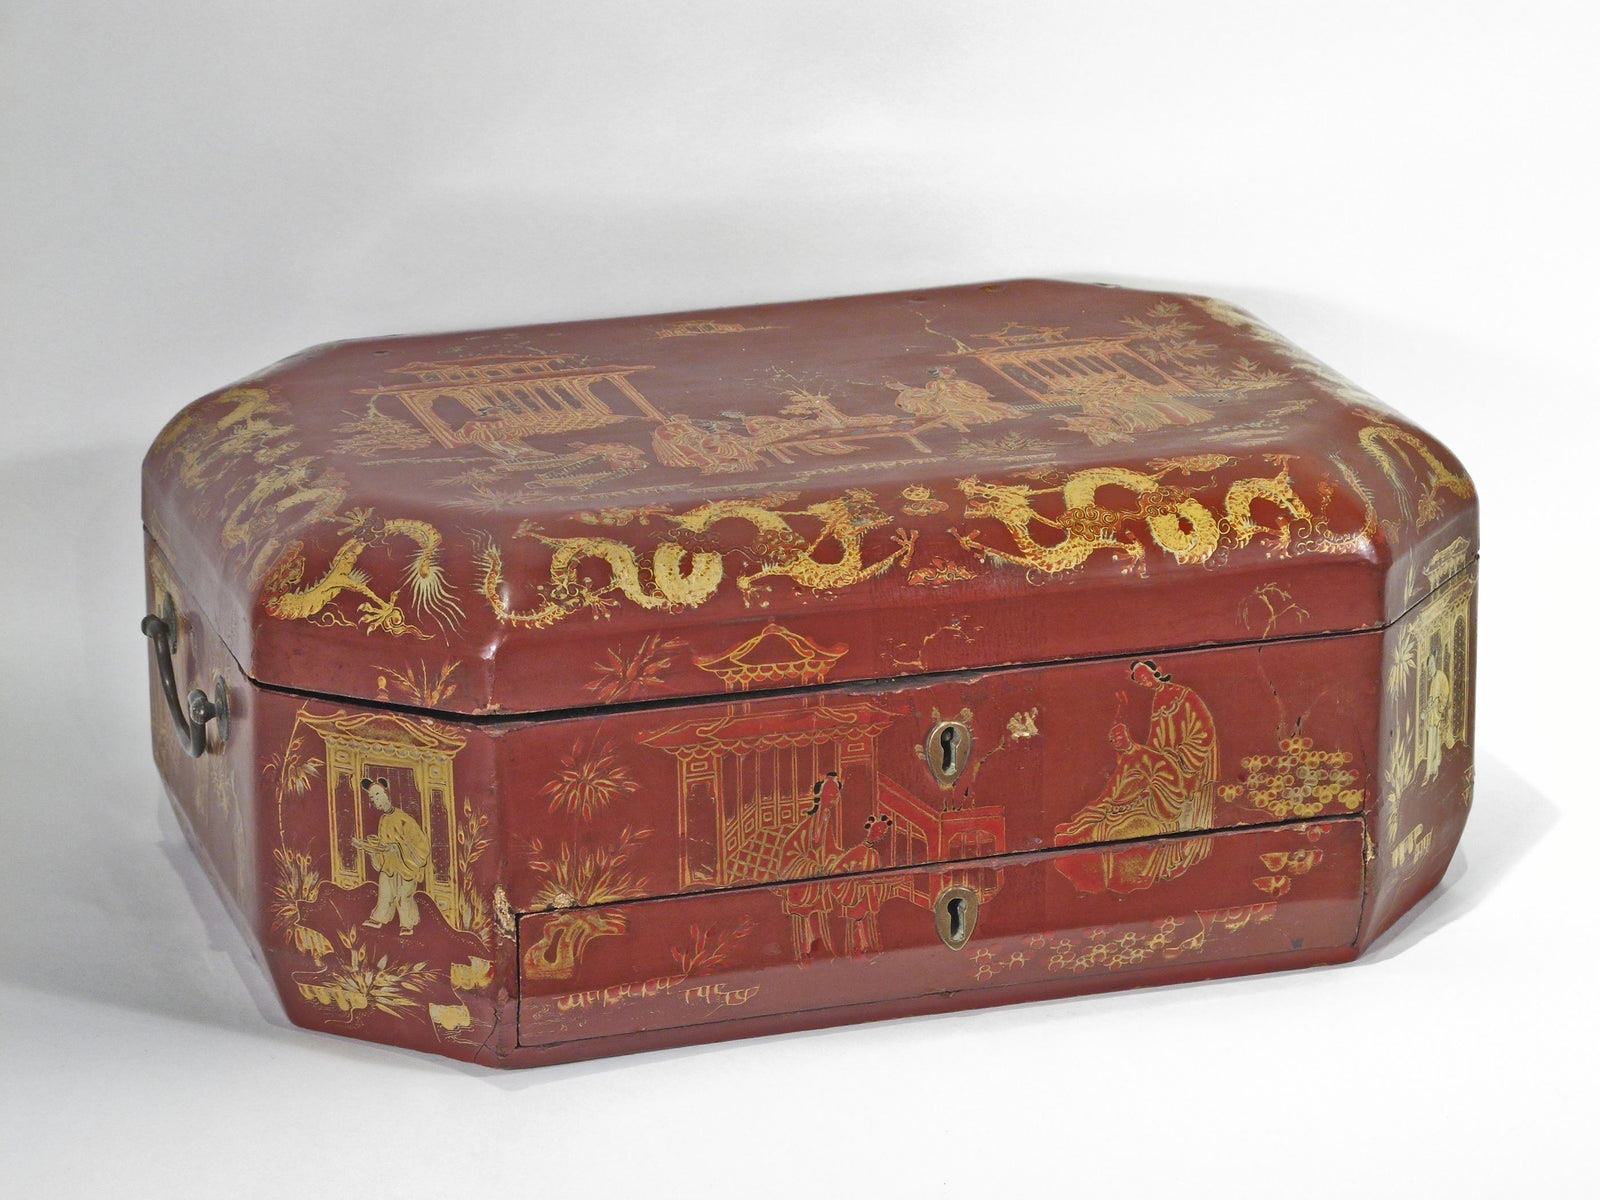 Gilded Red Lacquer Box - 19thC | Indigo Oriental Antiques